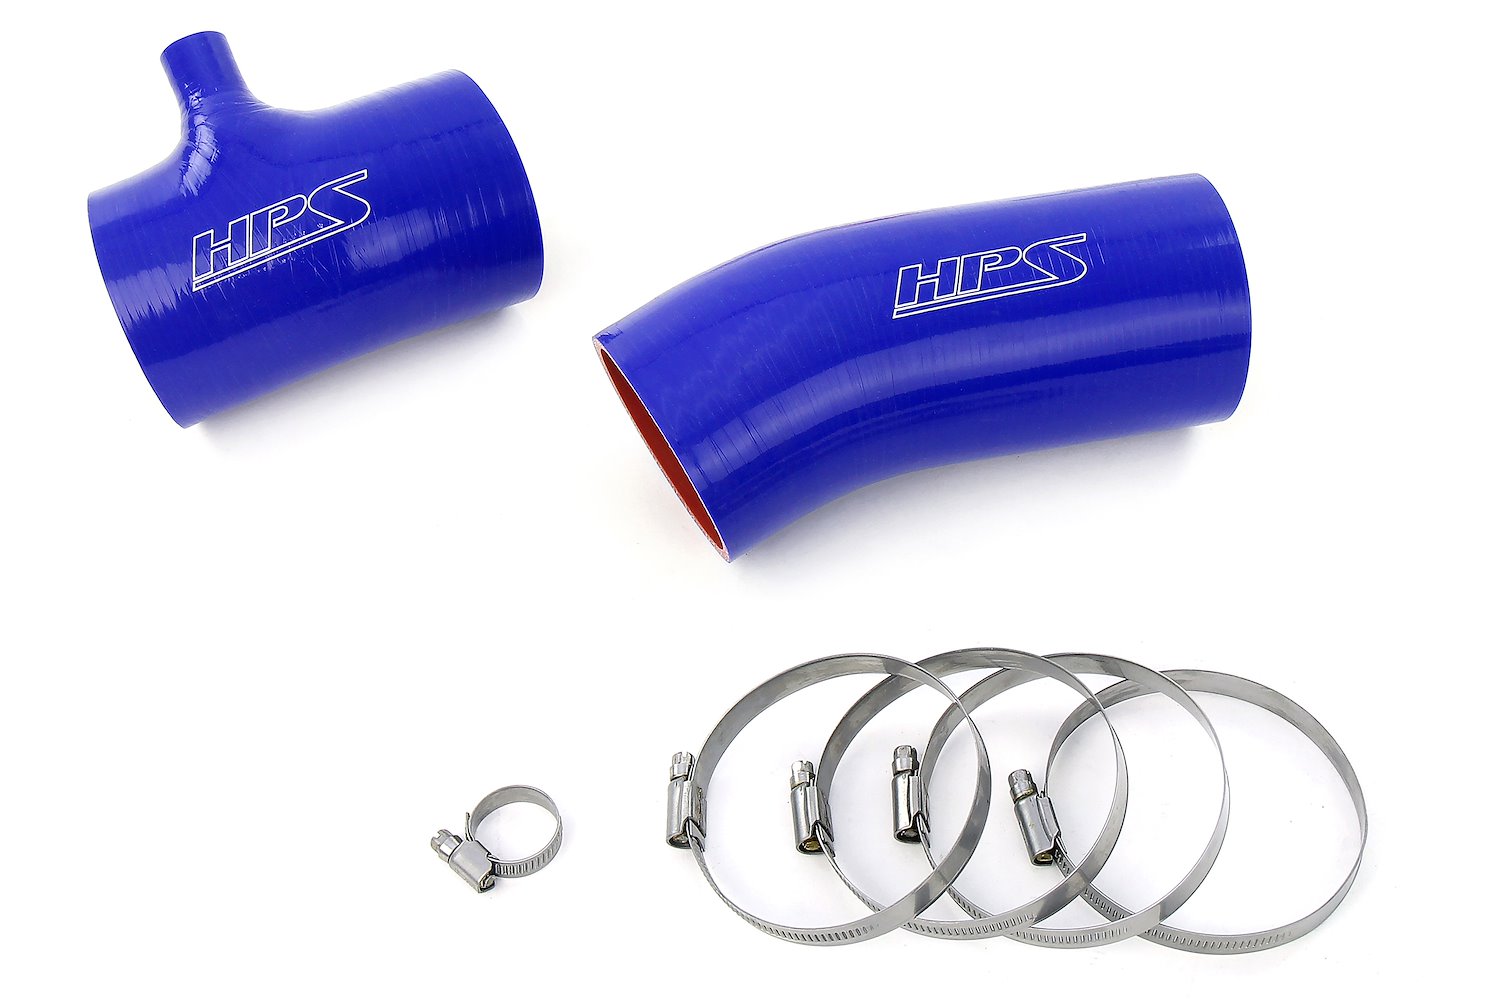 57-2104-BLUE Silicone Air Intake Kit, Replace Stock Restrictive Air Intake, Improve Throttle Response, No Heat Soak